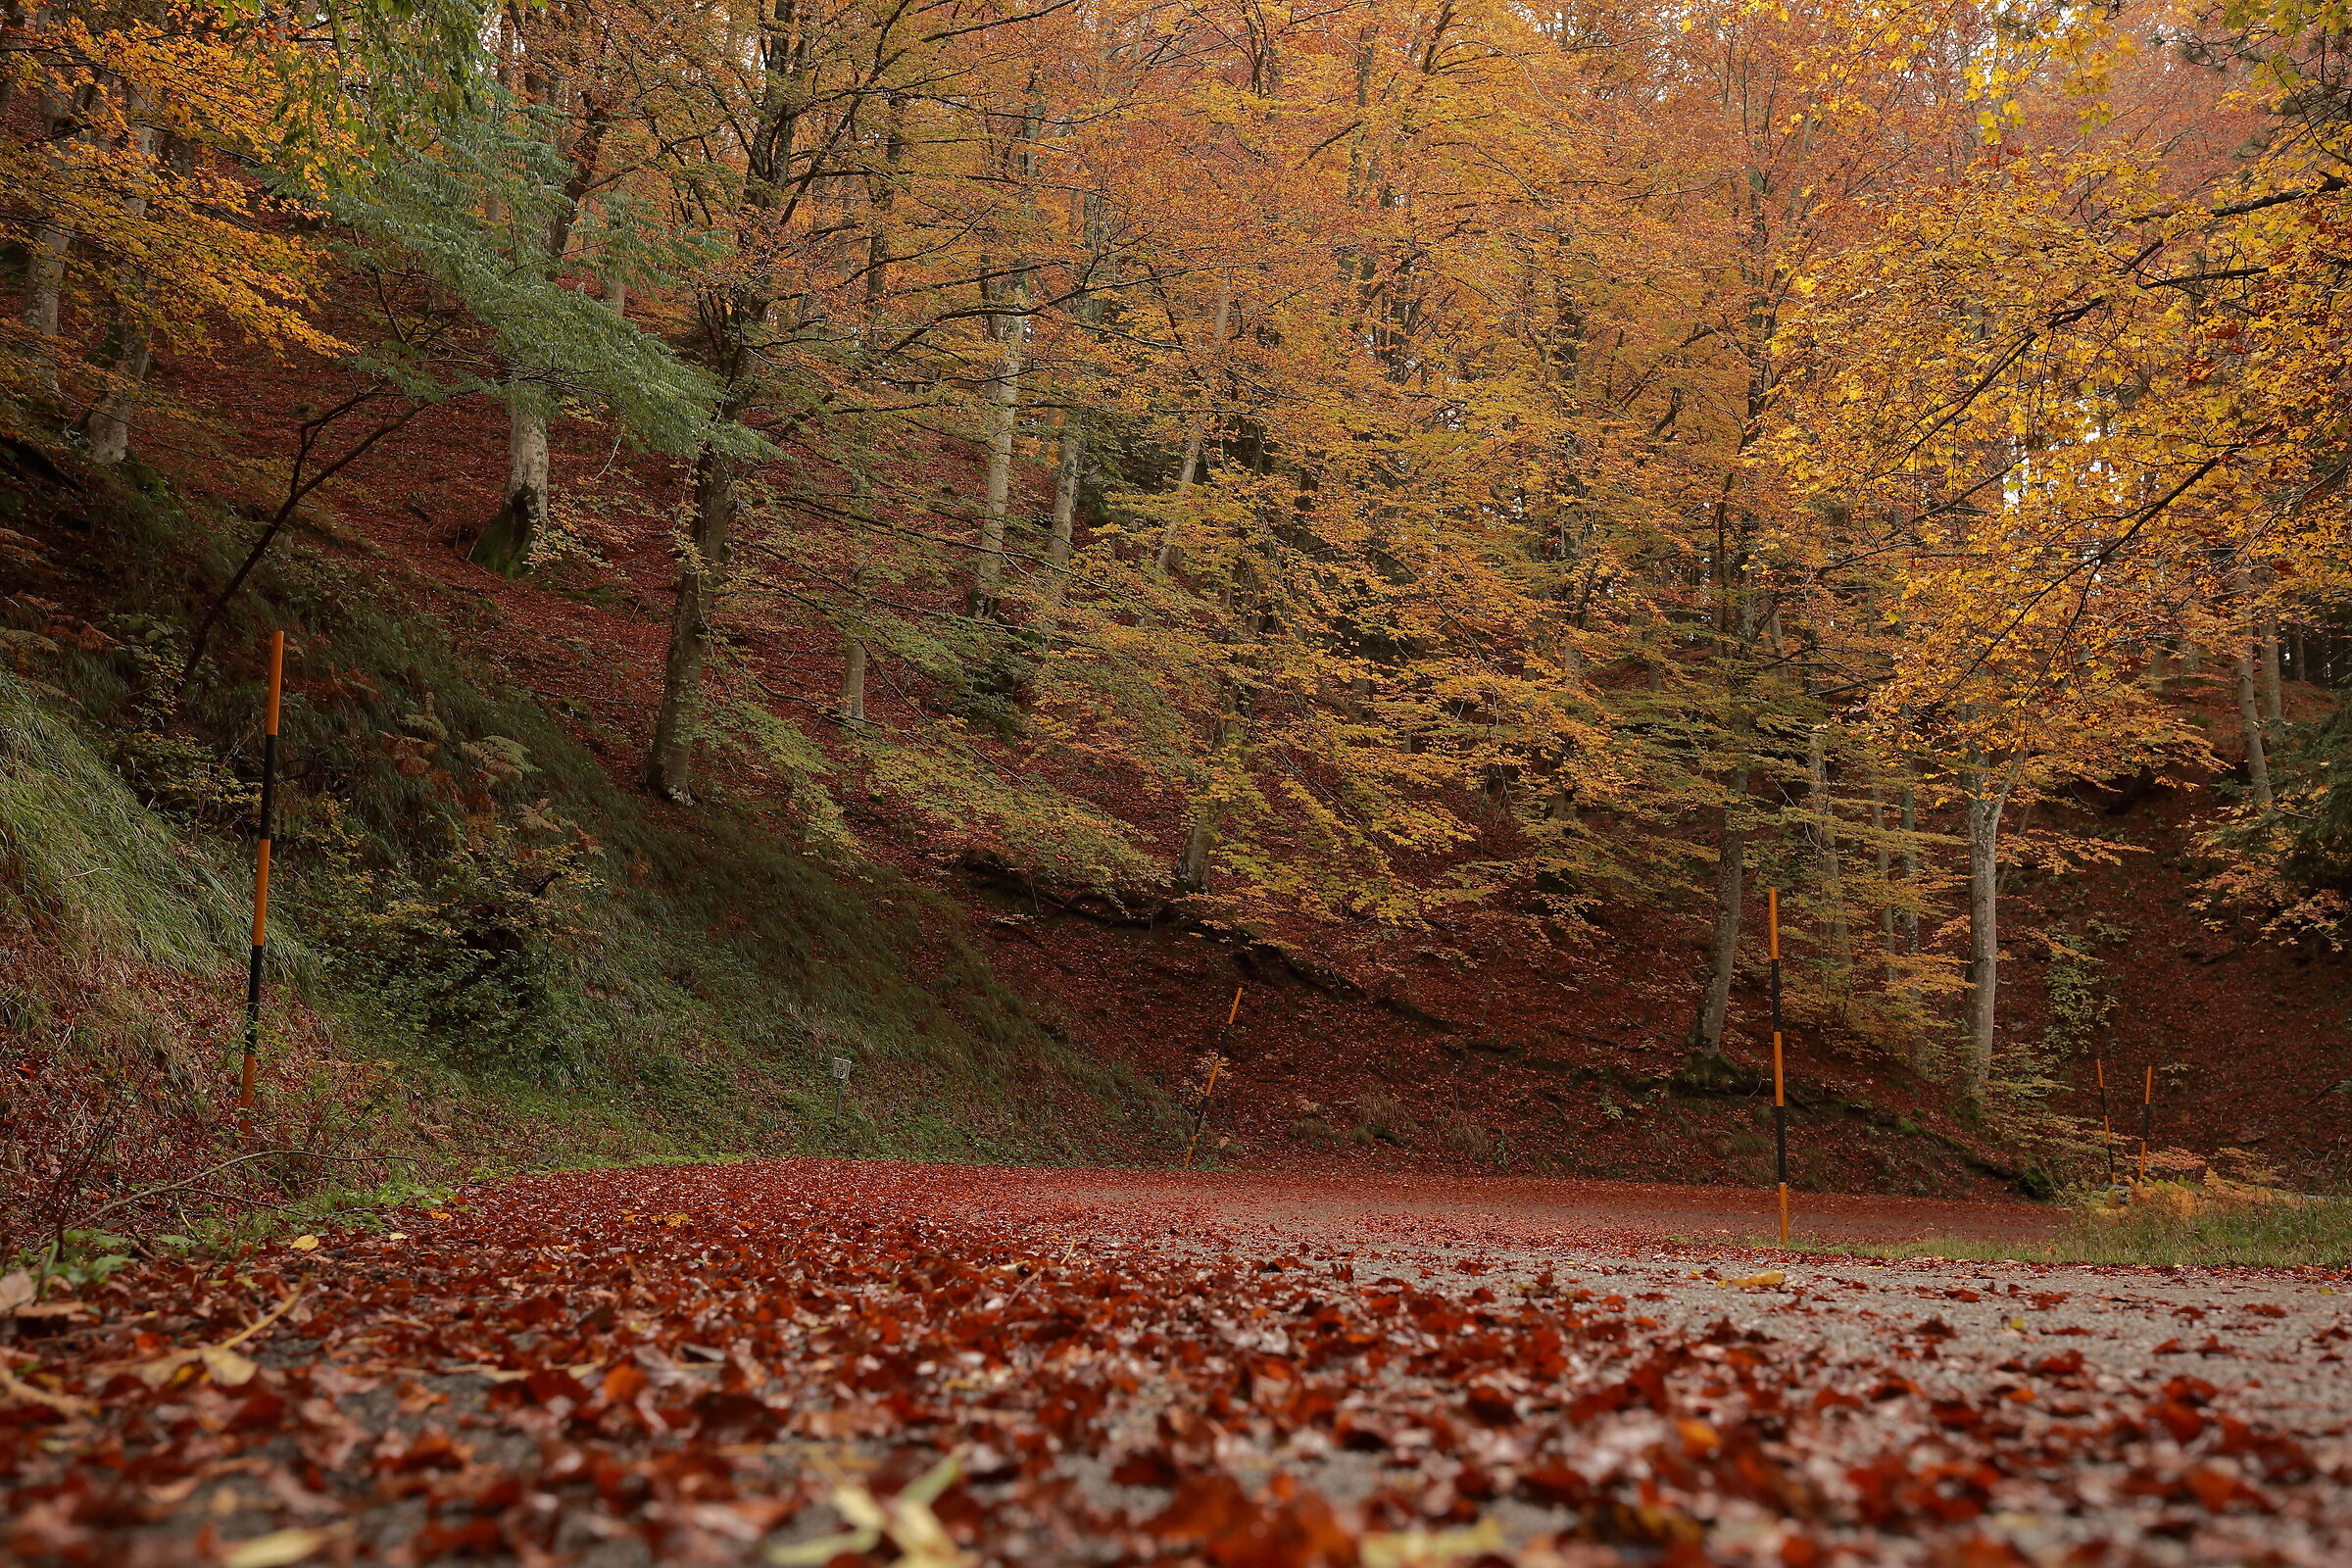 The road of autumn...